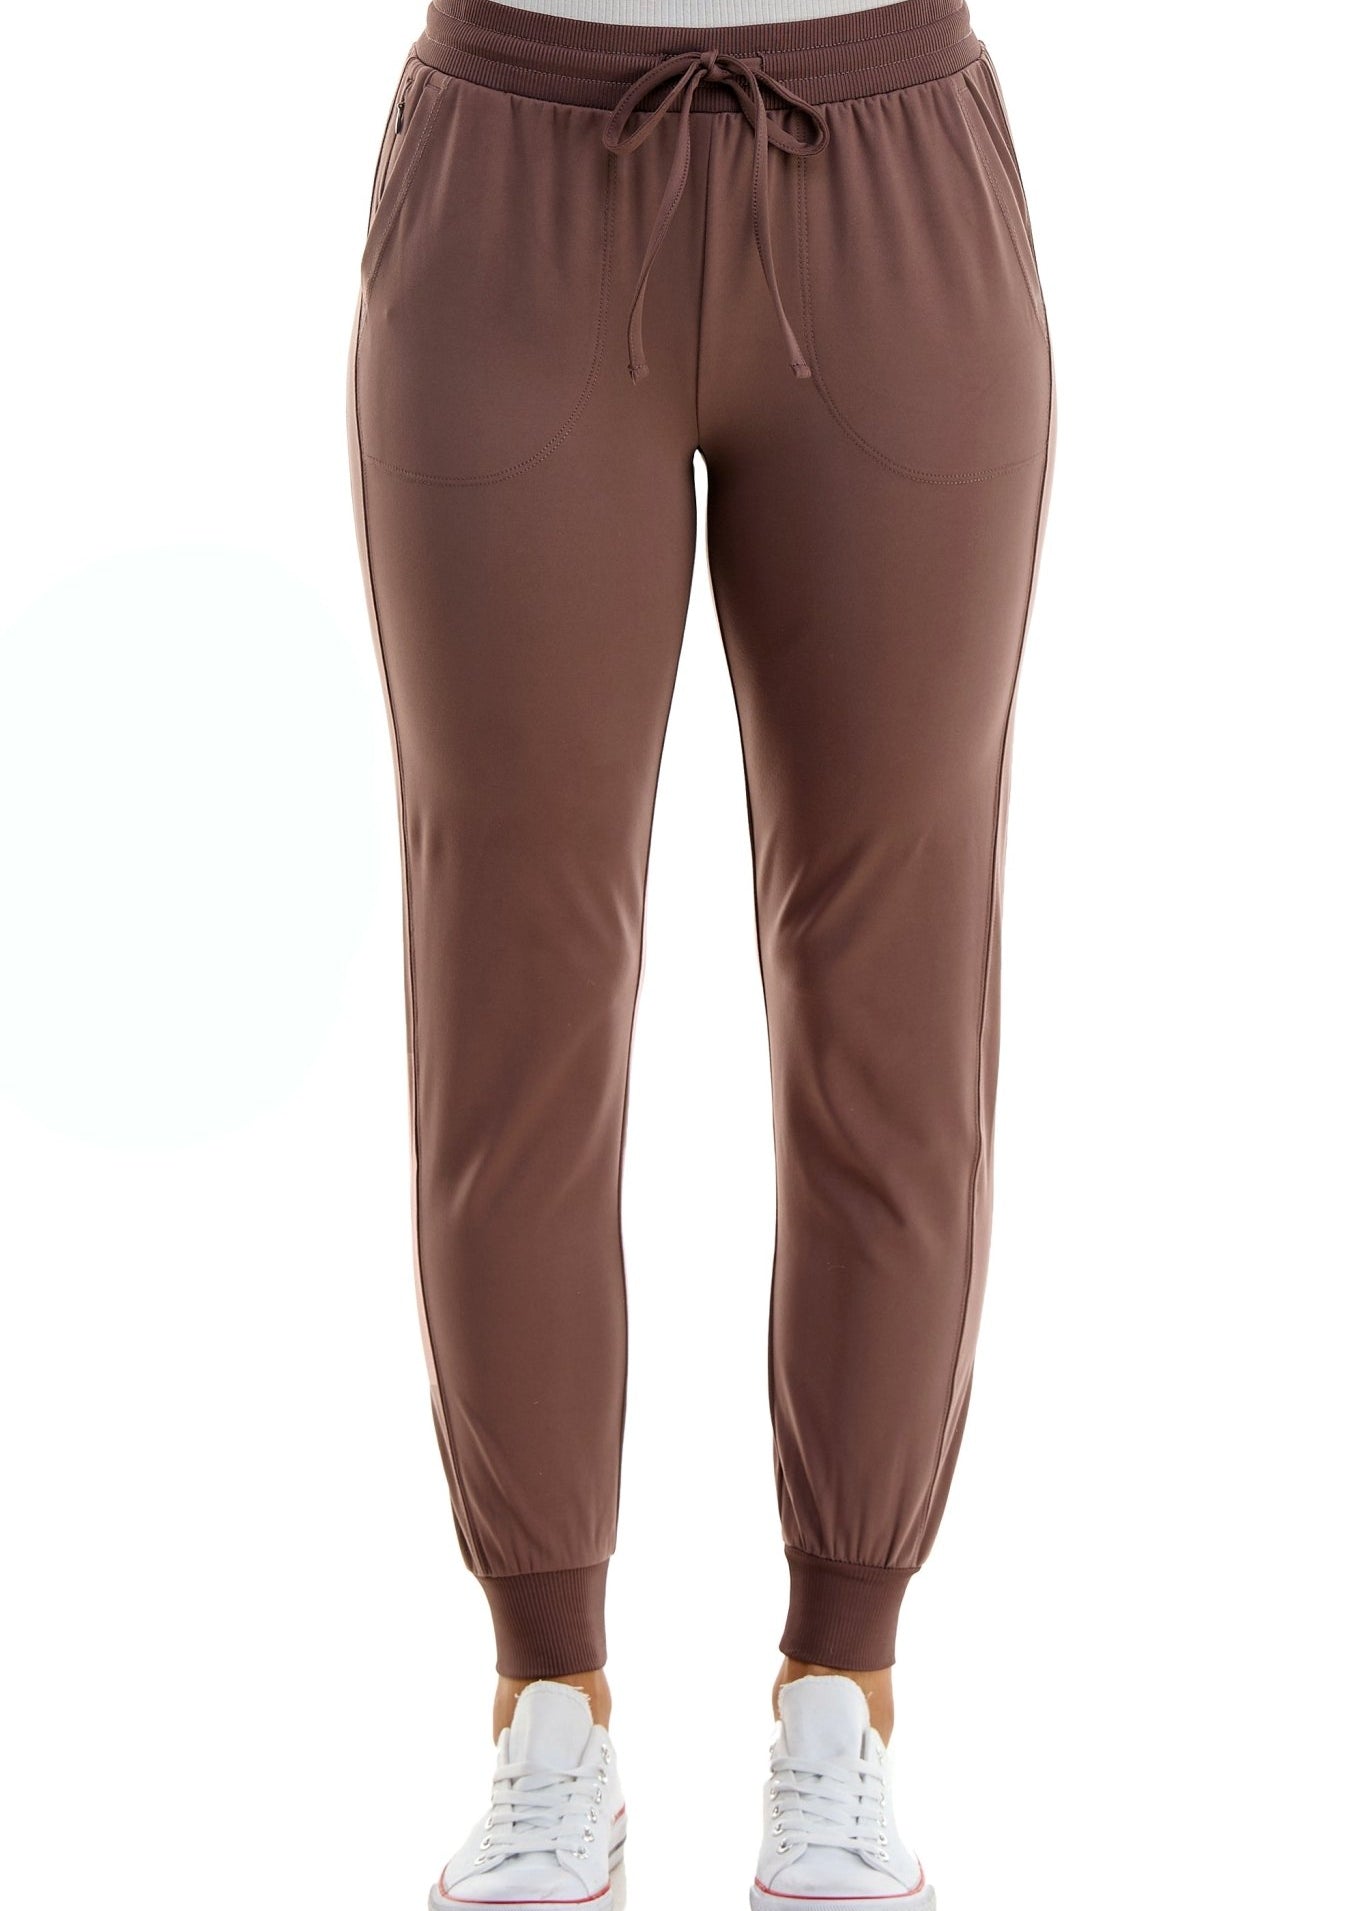 Zac & Rachel Women's Pull on Jogger Pant with Tie Front and Side Pockets - Plus - DressbarnPants